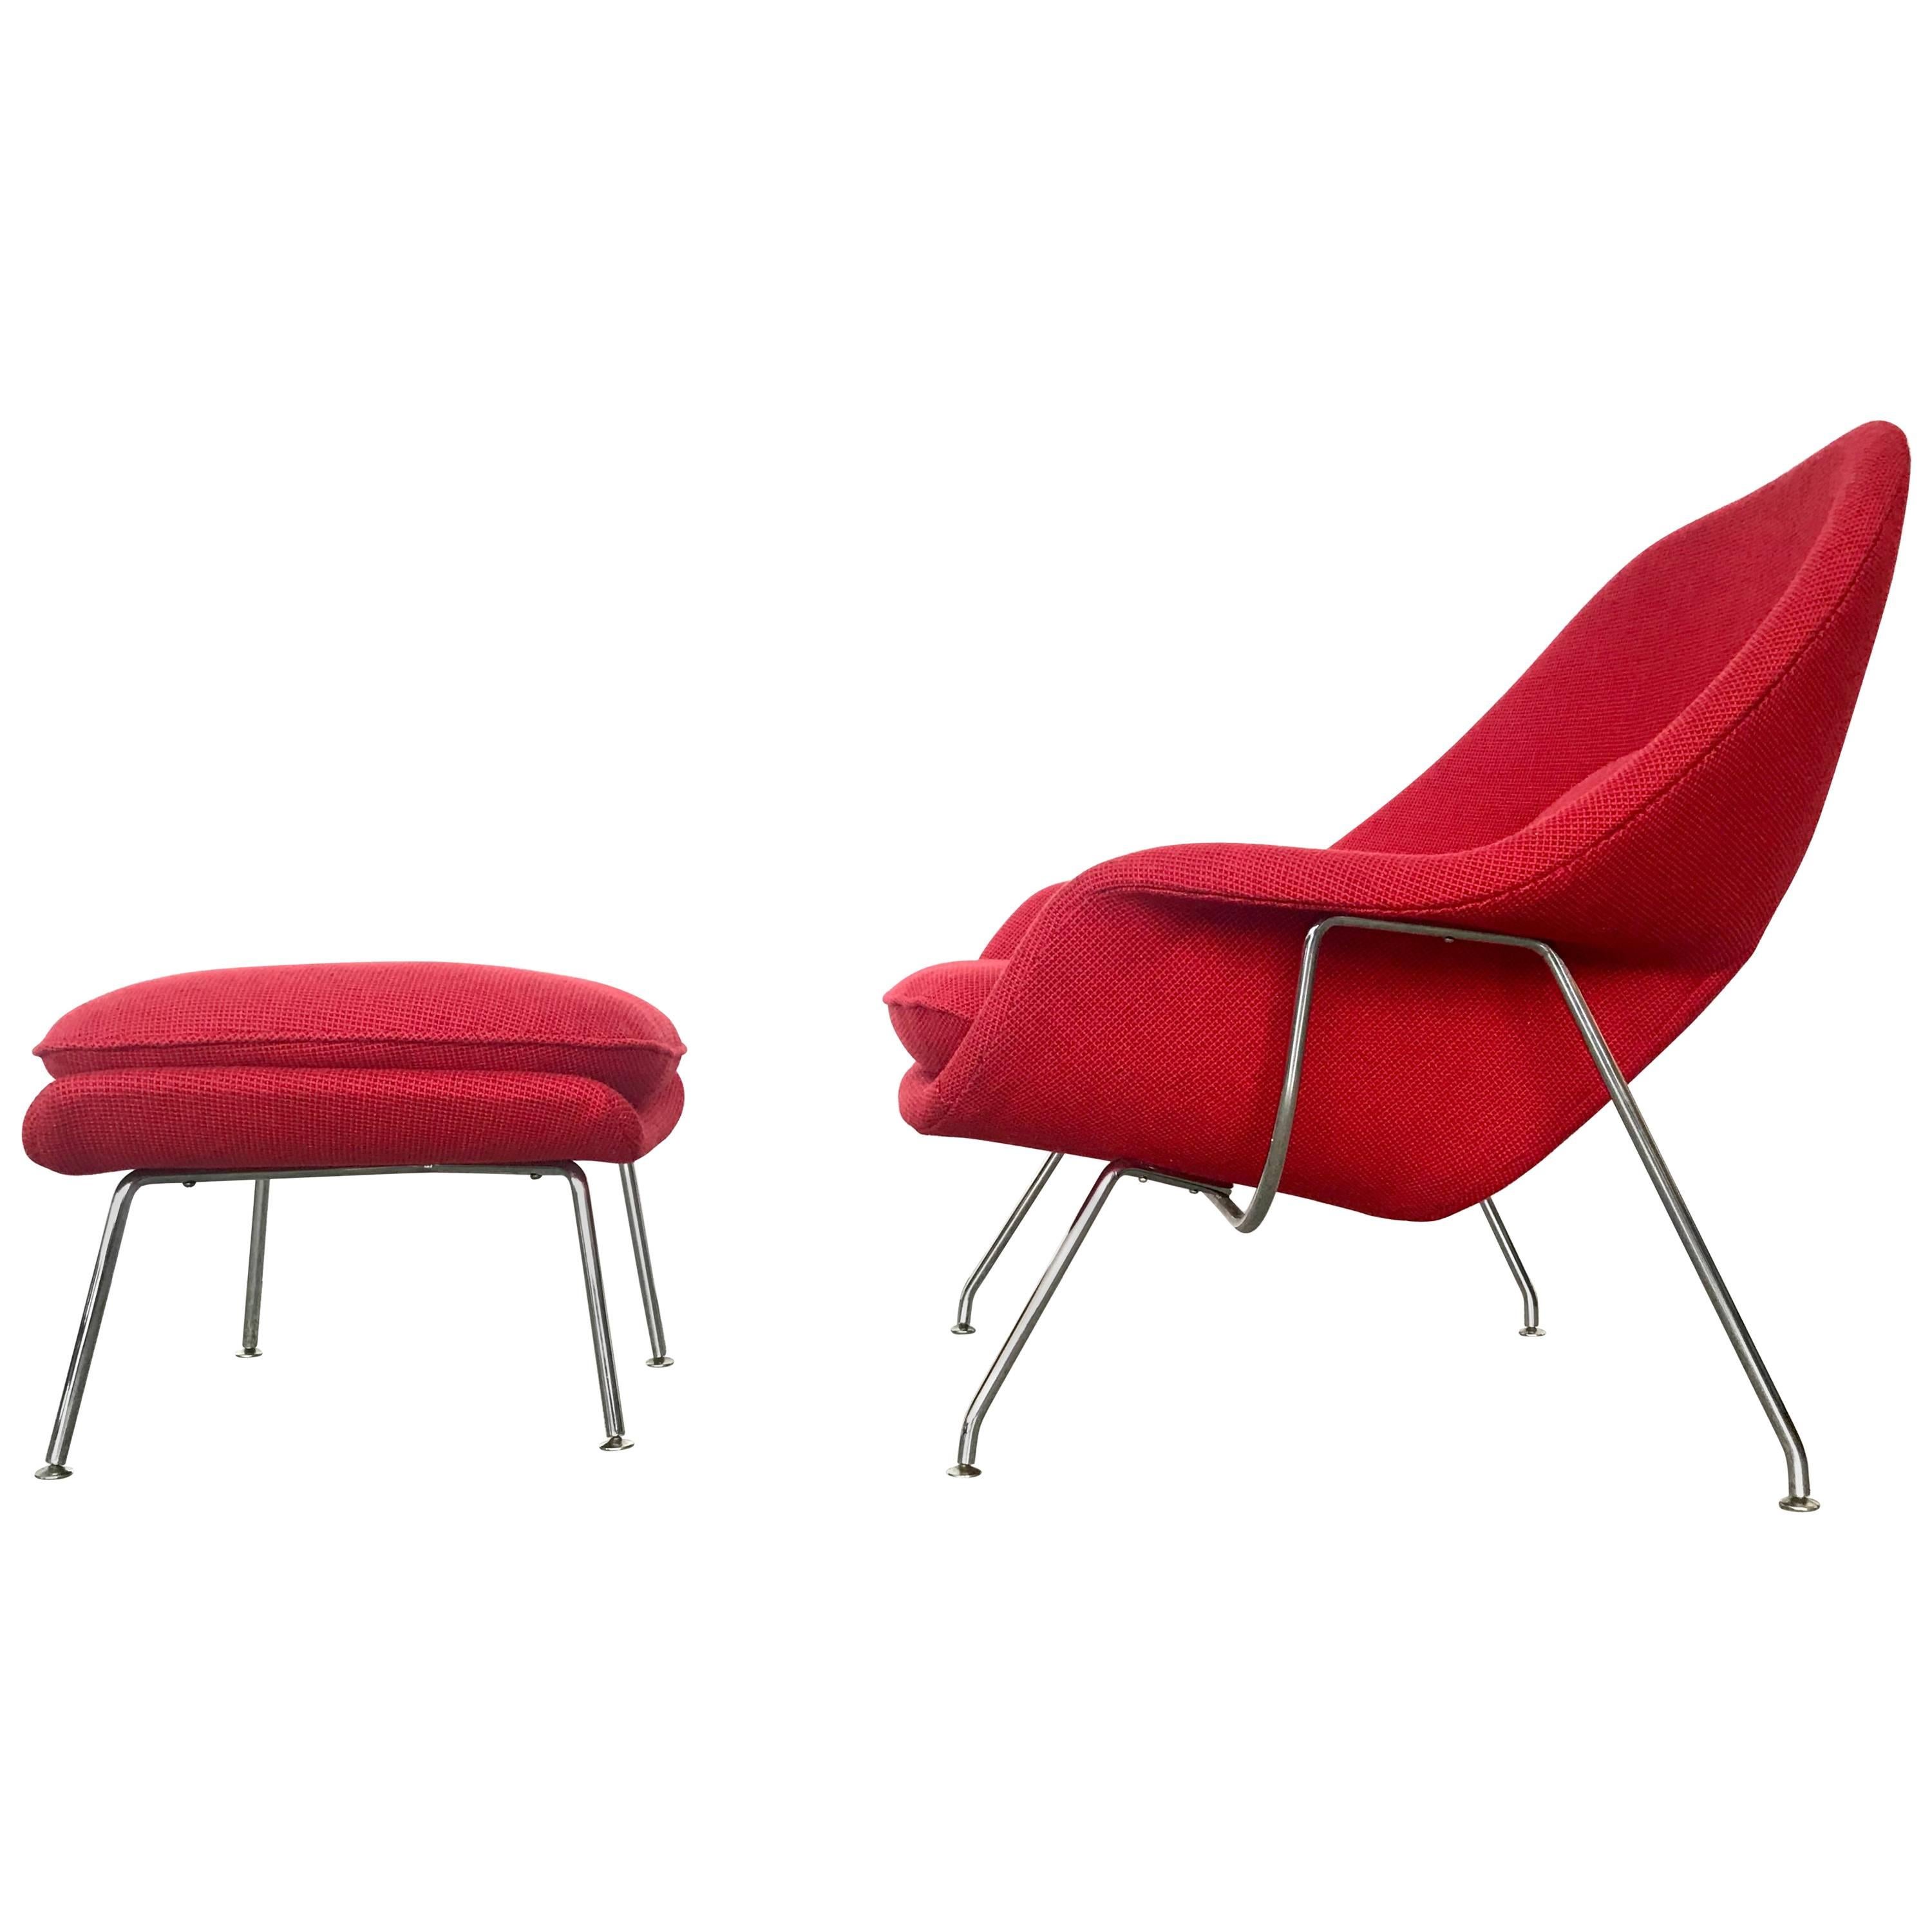 Early Eero Saarinen Womb Chair and Ottoman Produced by Knoll